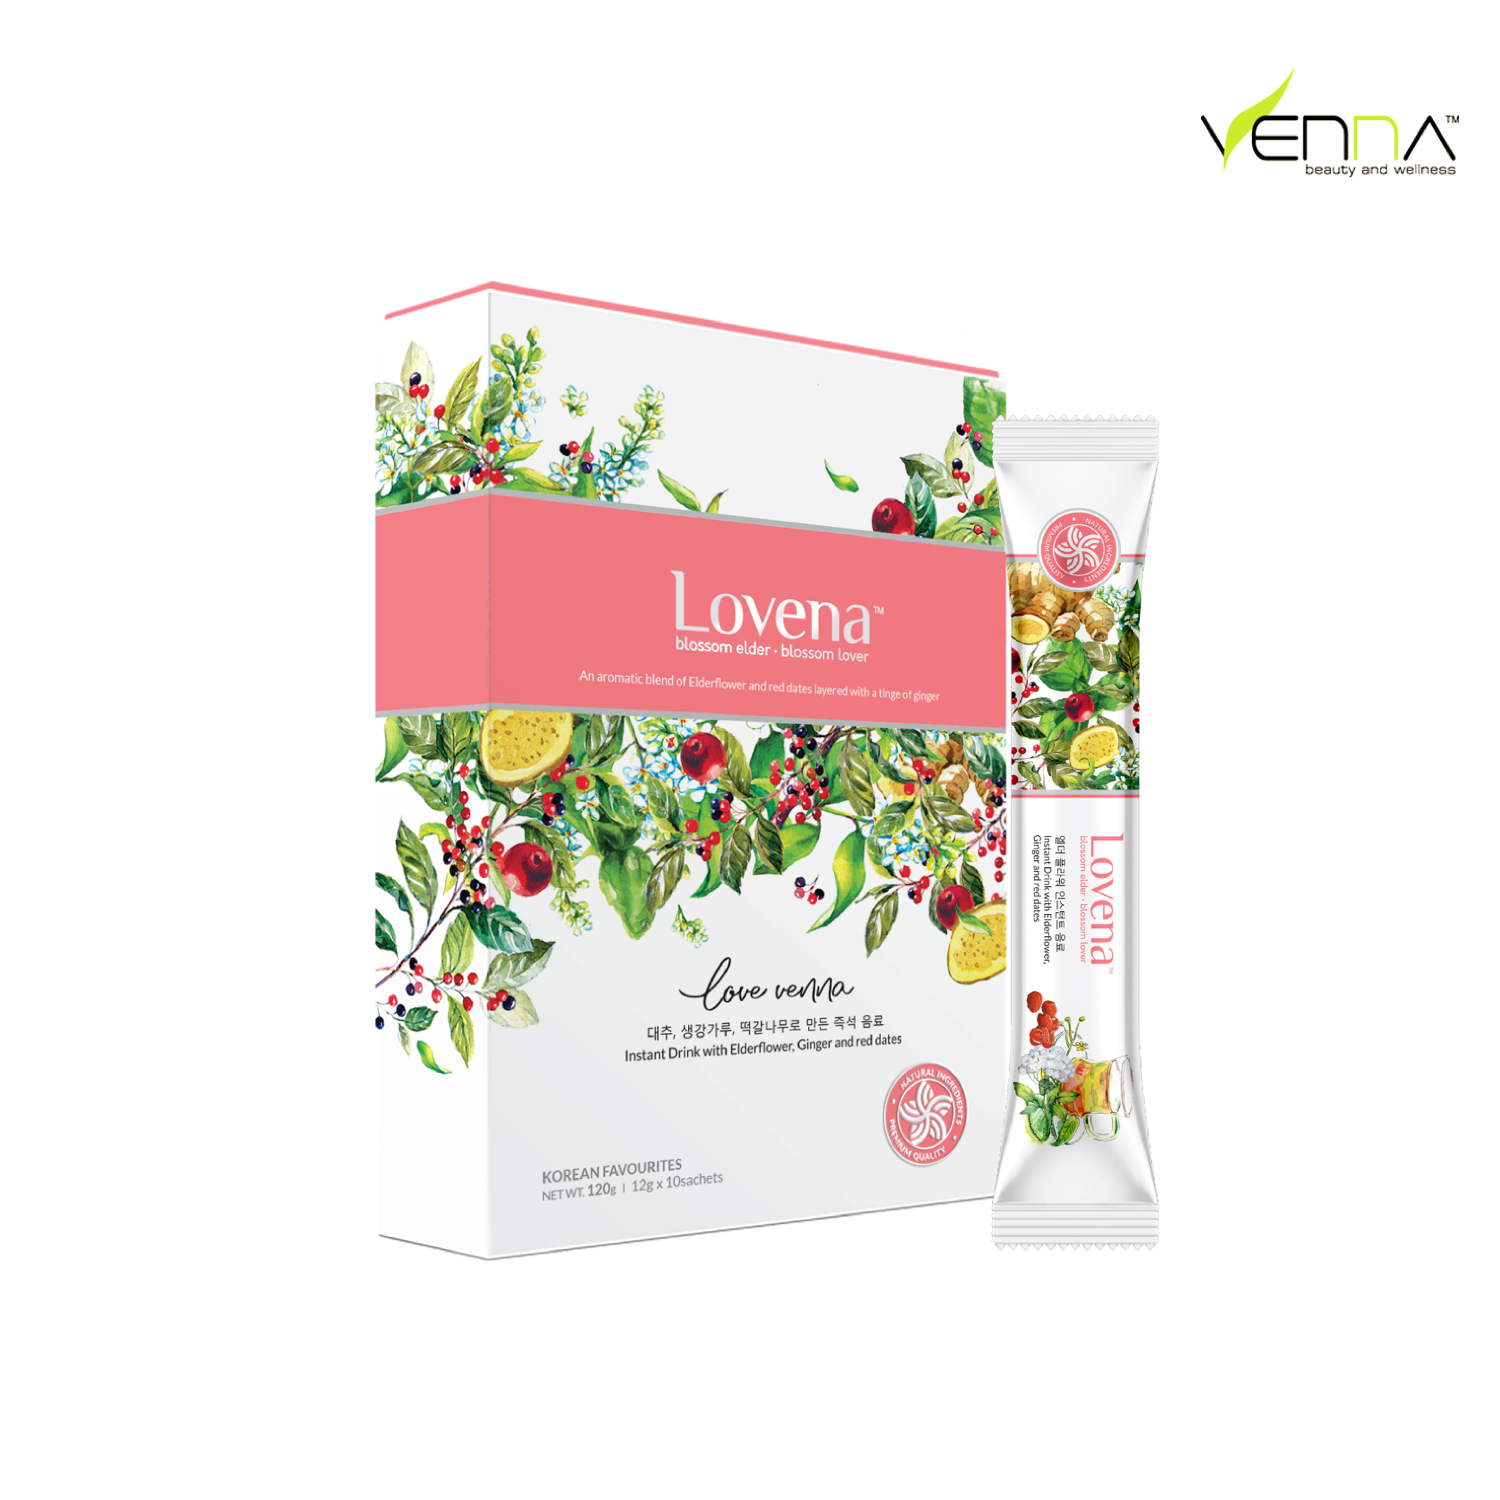 Buy Lovena - Period Pain Reliever Online in Malaysia - Review & Price | Insider Mall